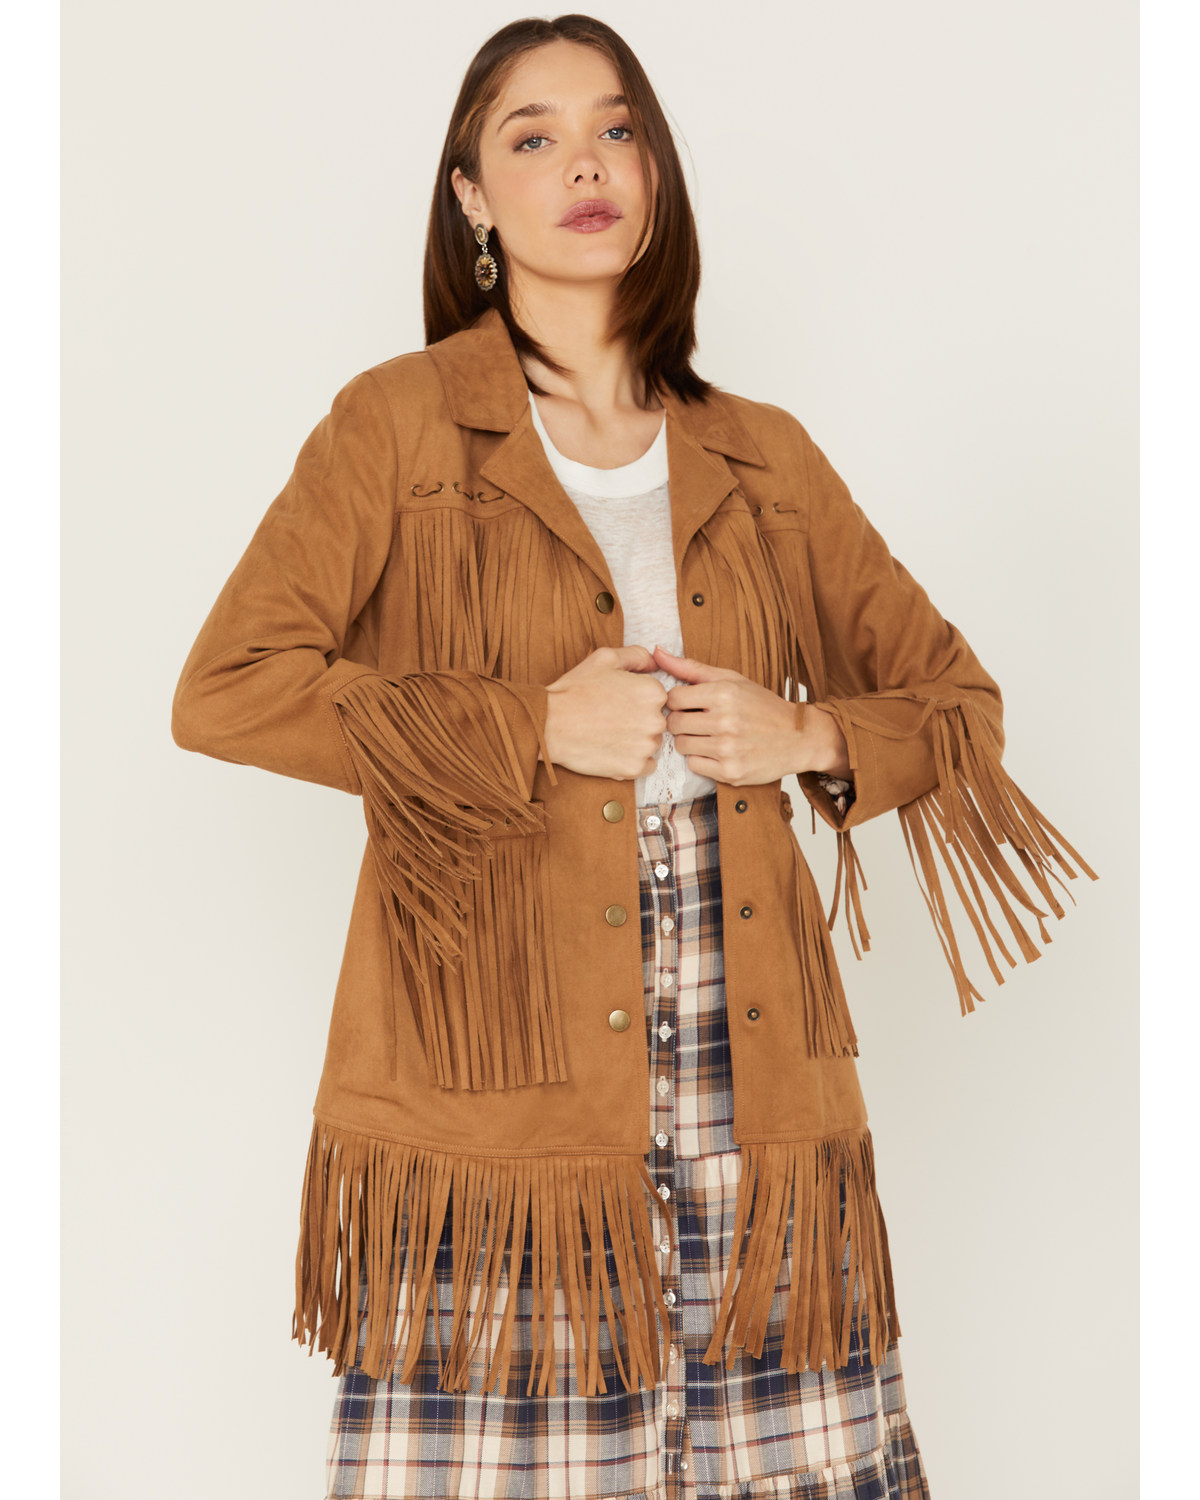 Powder River Outfitters Women's Suede Fringe Snap Jacket